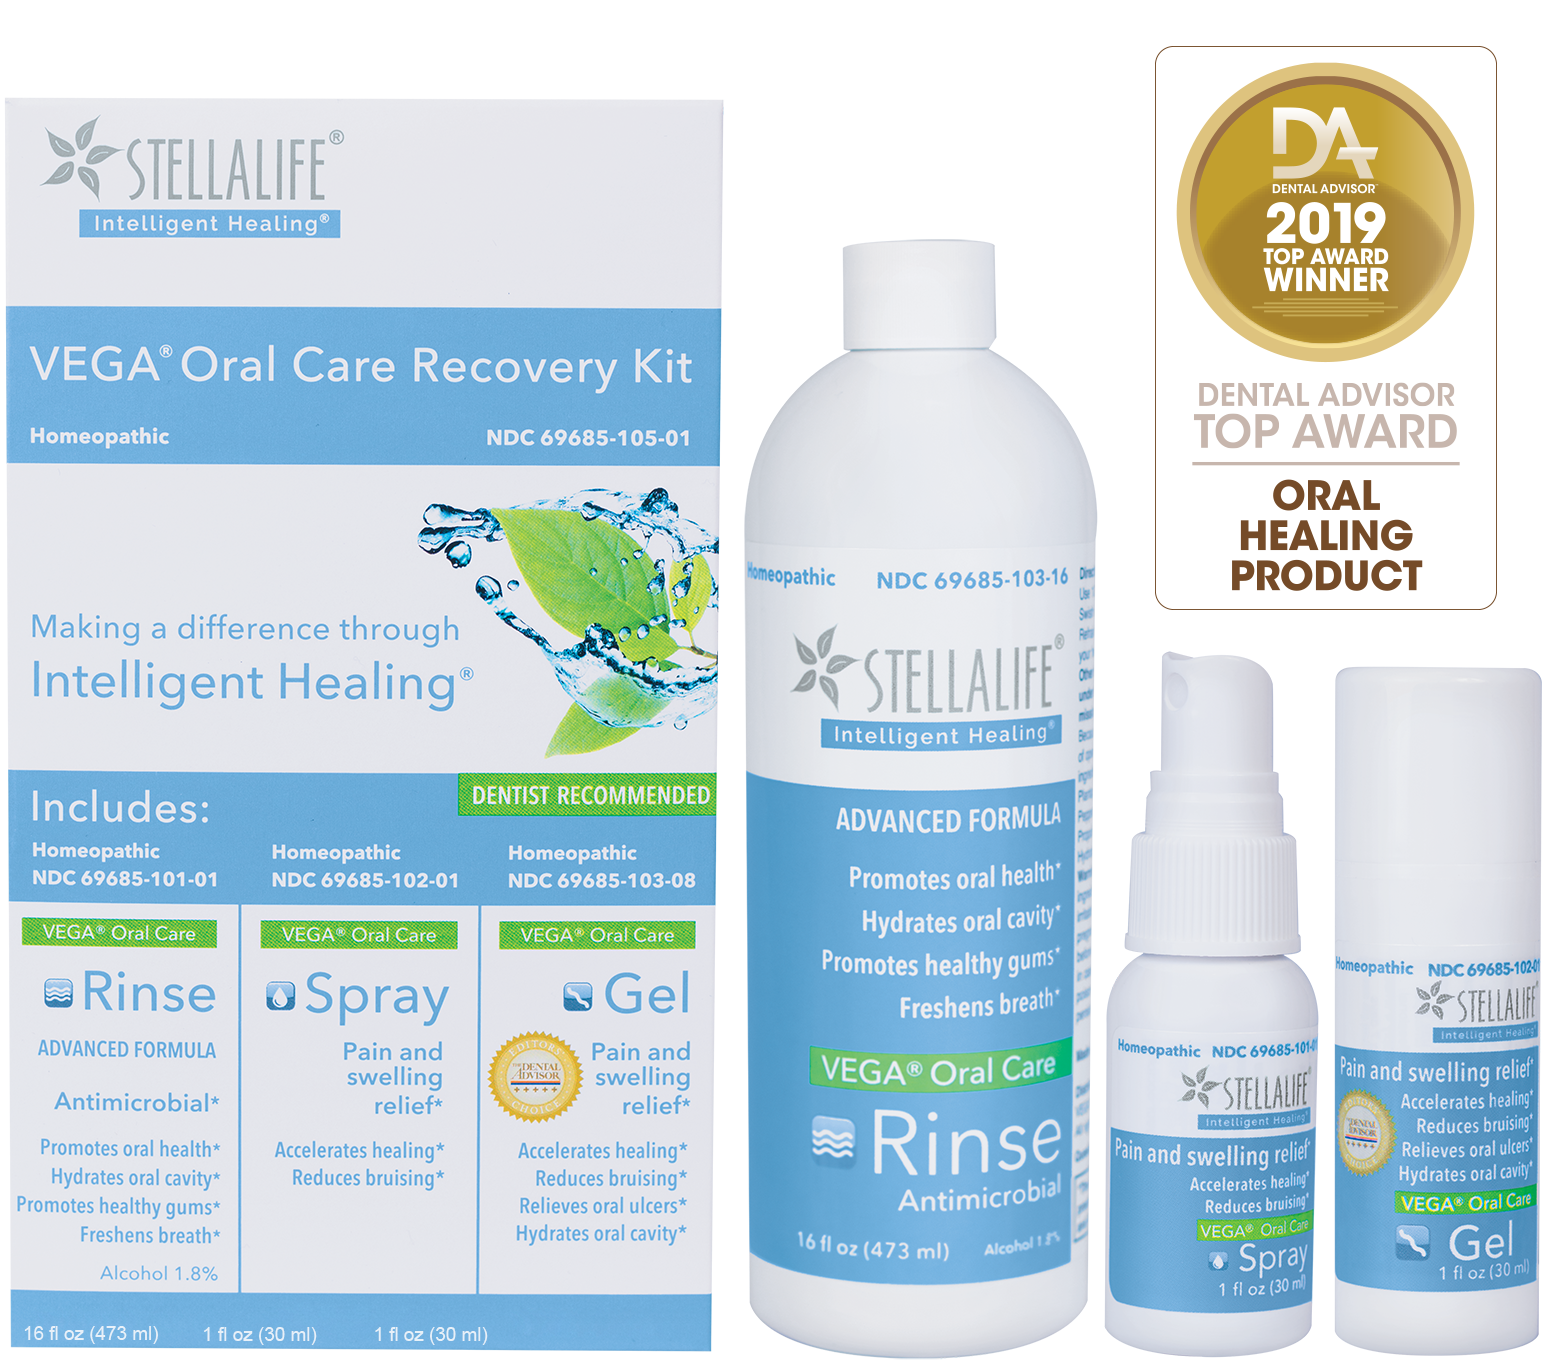 StellaLife is proud to introduce new VEGA Oral Care Recovery Kit with 16oz Rinse! Image